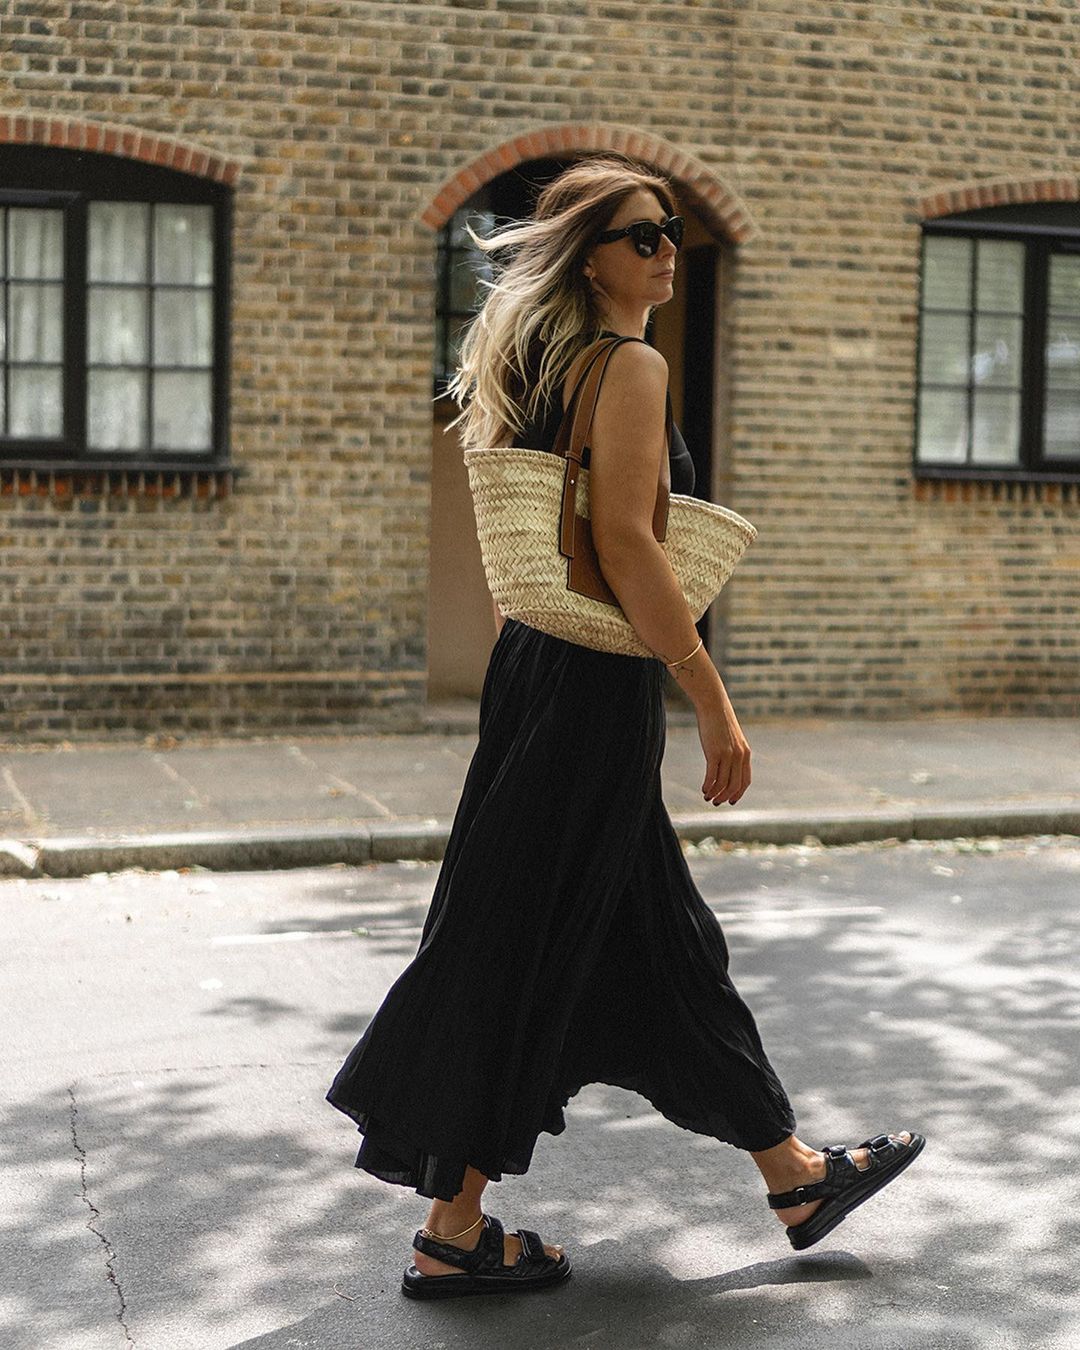 In Fashion | Style Inspiration: Black for Summertime